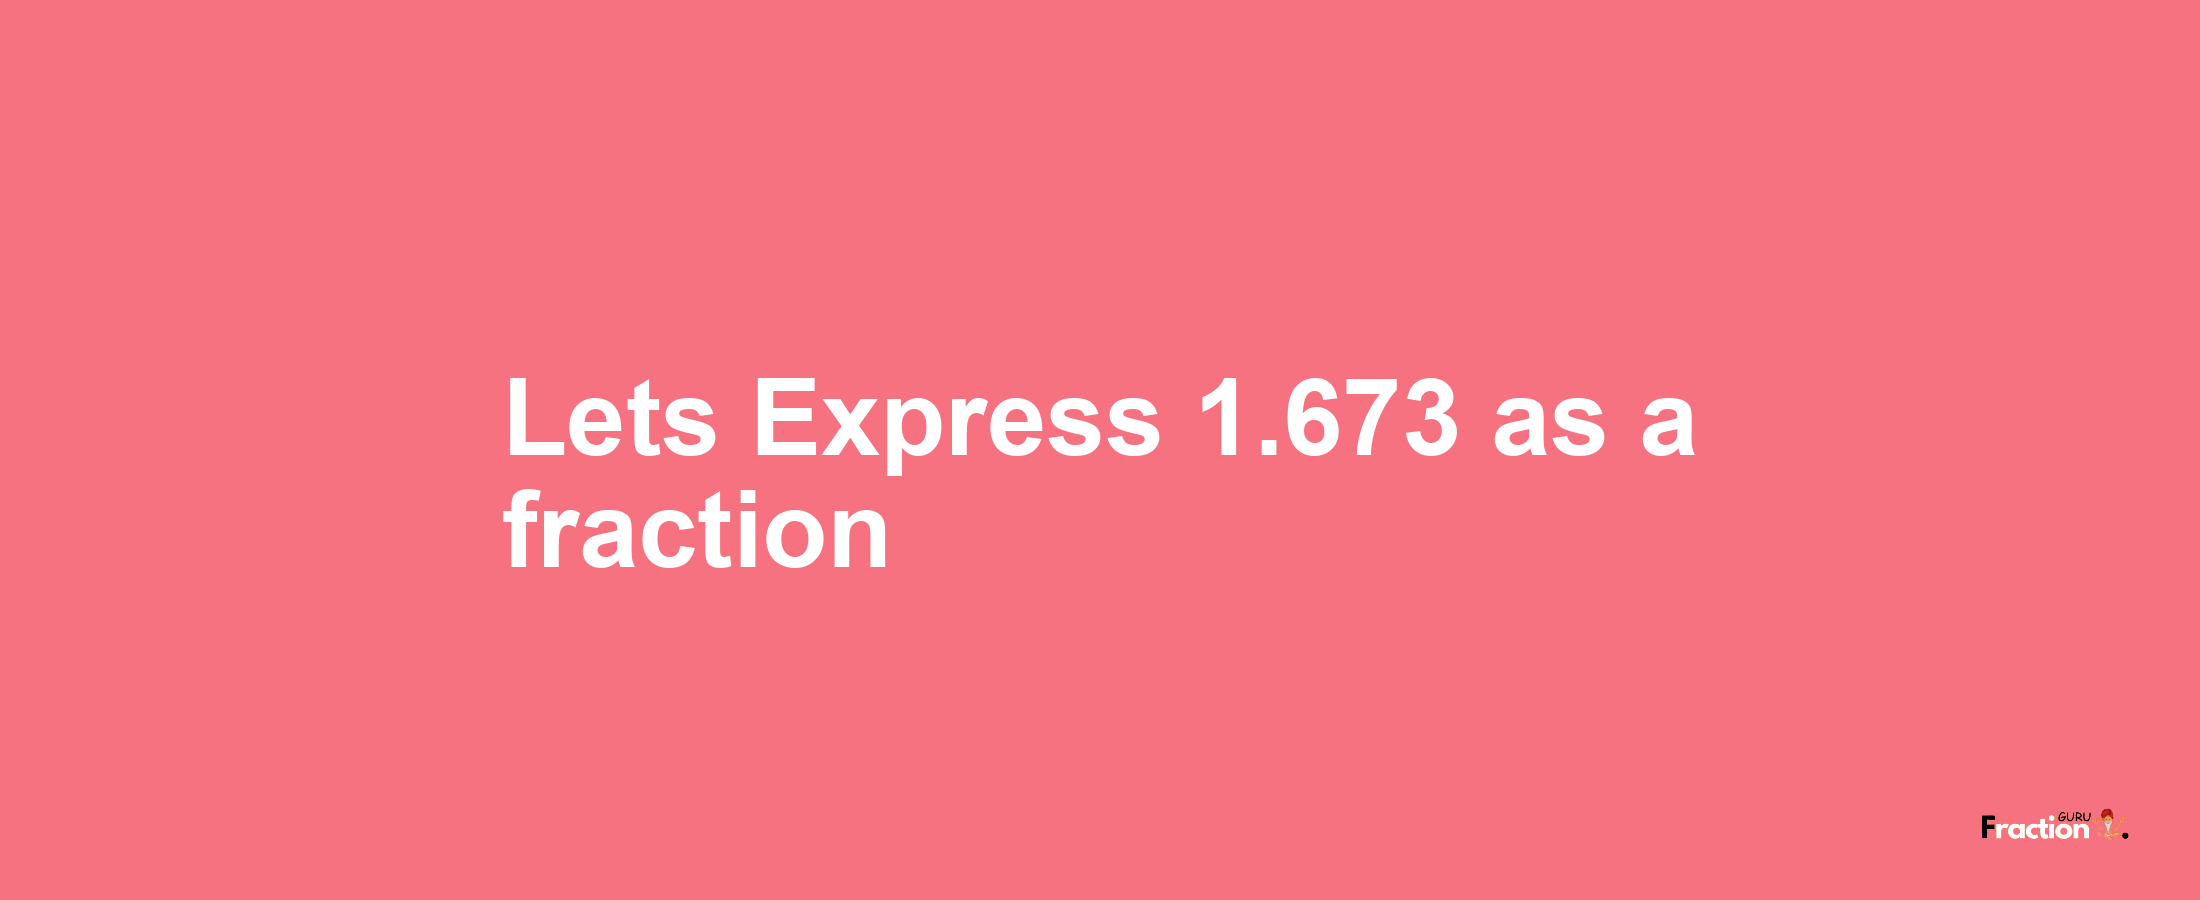 Lets Express 1.673 as afraction